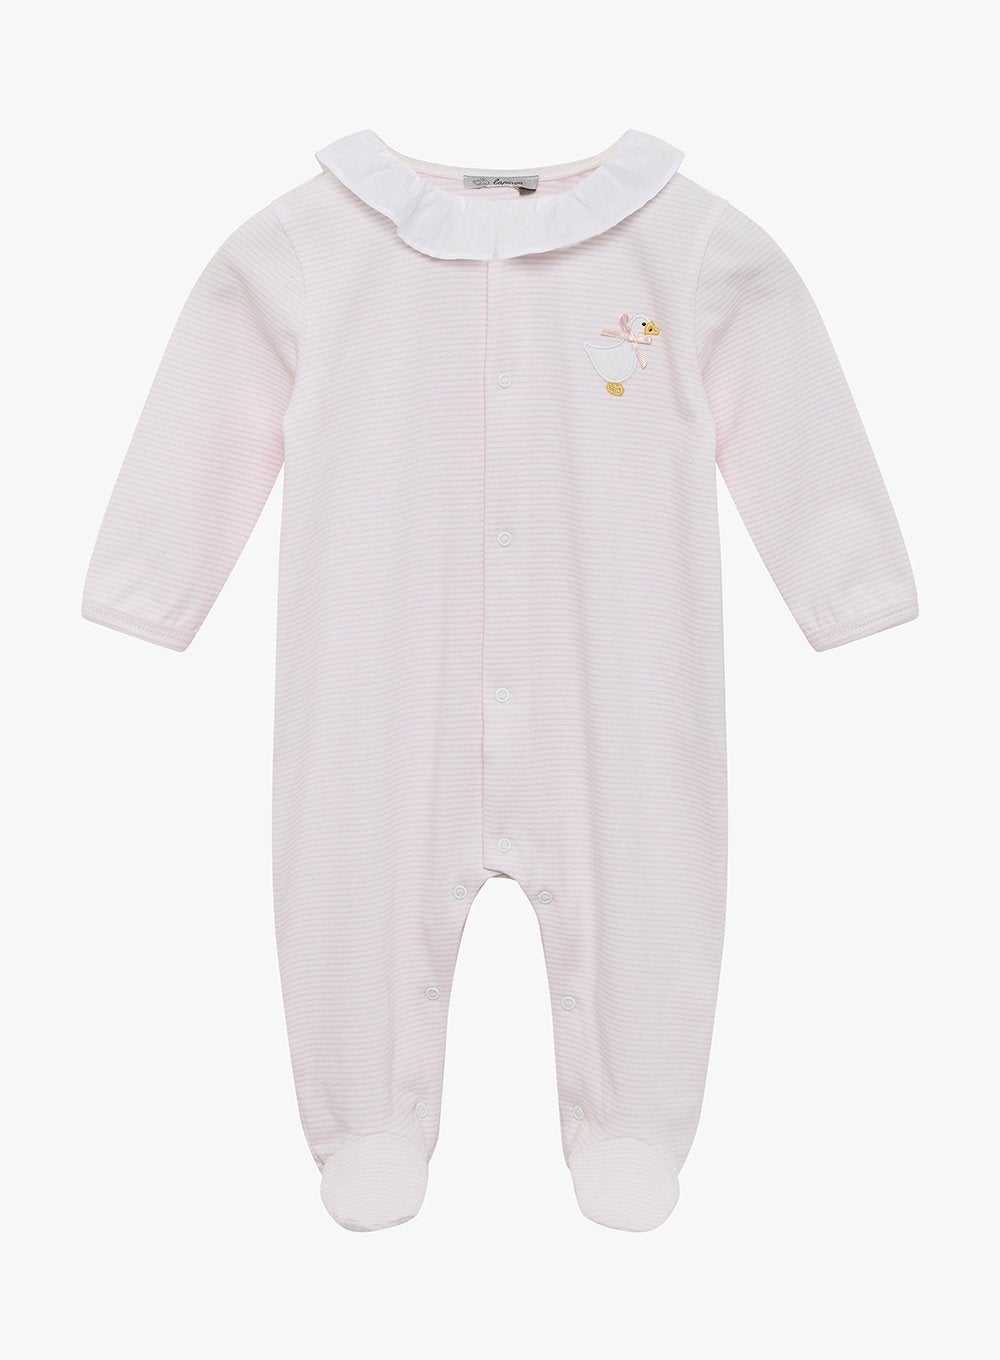 Baby Pink Duckling Gift Set | Trotters London – Trotters Childrenswear USA